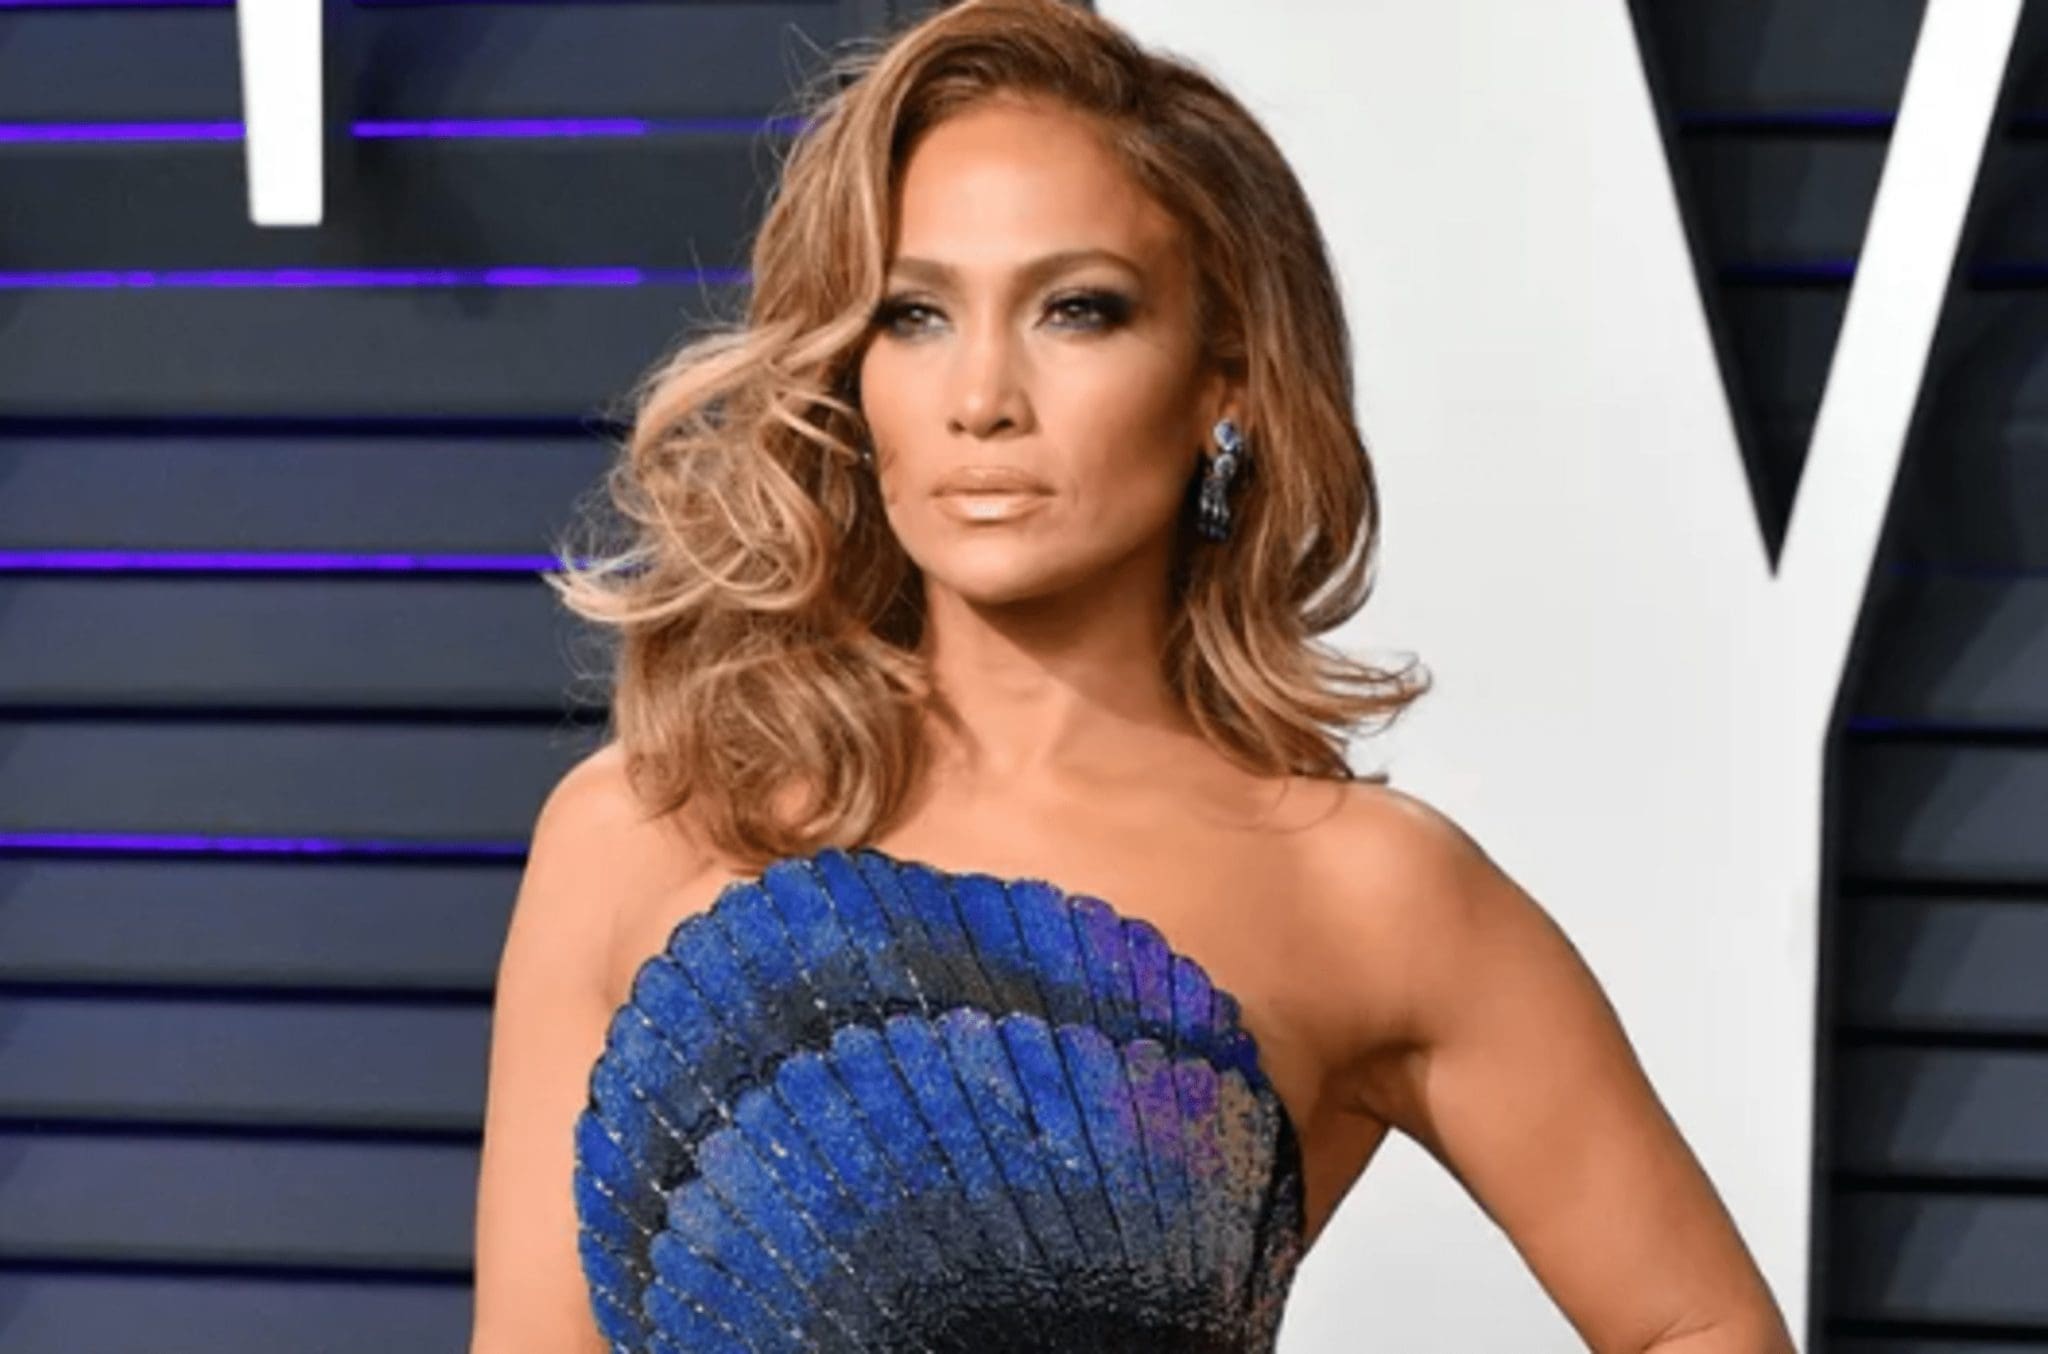 Jennifer Lopez: "Being Proudly Latina Made Me Feel Special"